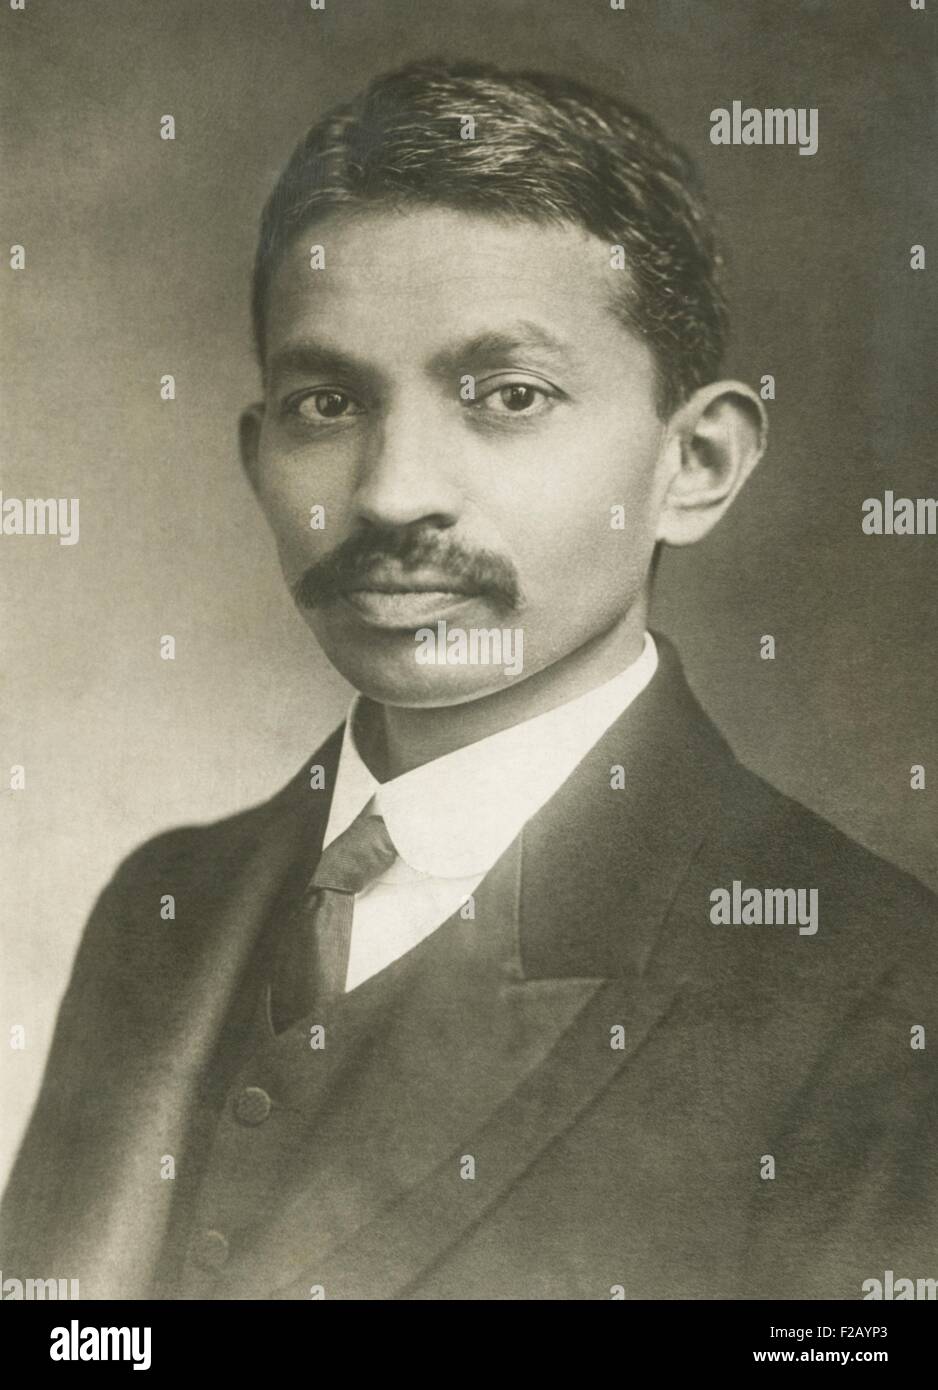 Mohandas Karamchand Gandhi, later known as Mahatma Gandhi, ca. 1900 at age 30. In 1893 Gandhi traveled to South Africa to work lawyer for Muslim Indian Traders in Pretoria. He returned to India in 1914. (CSU 2015 9 712) Stock Photo